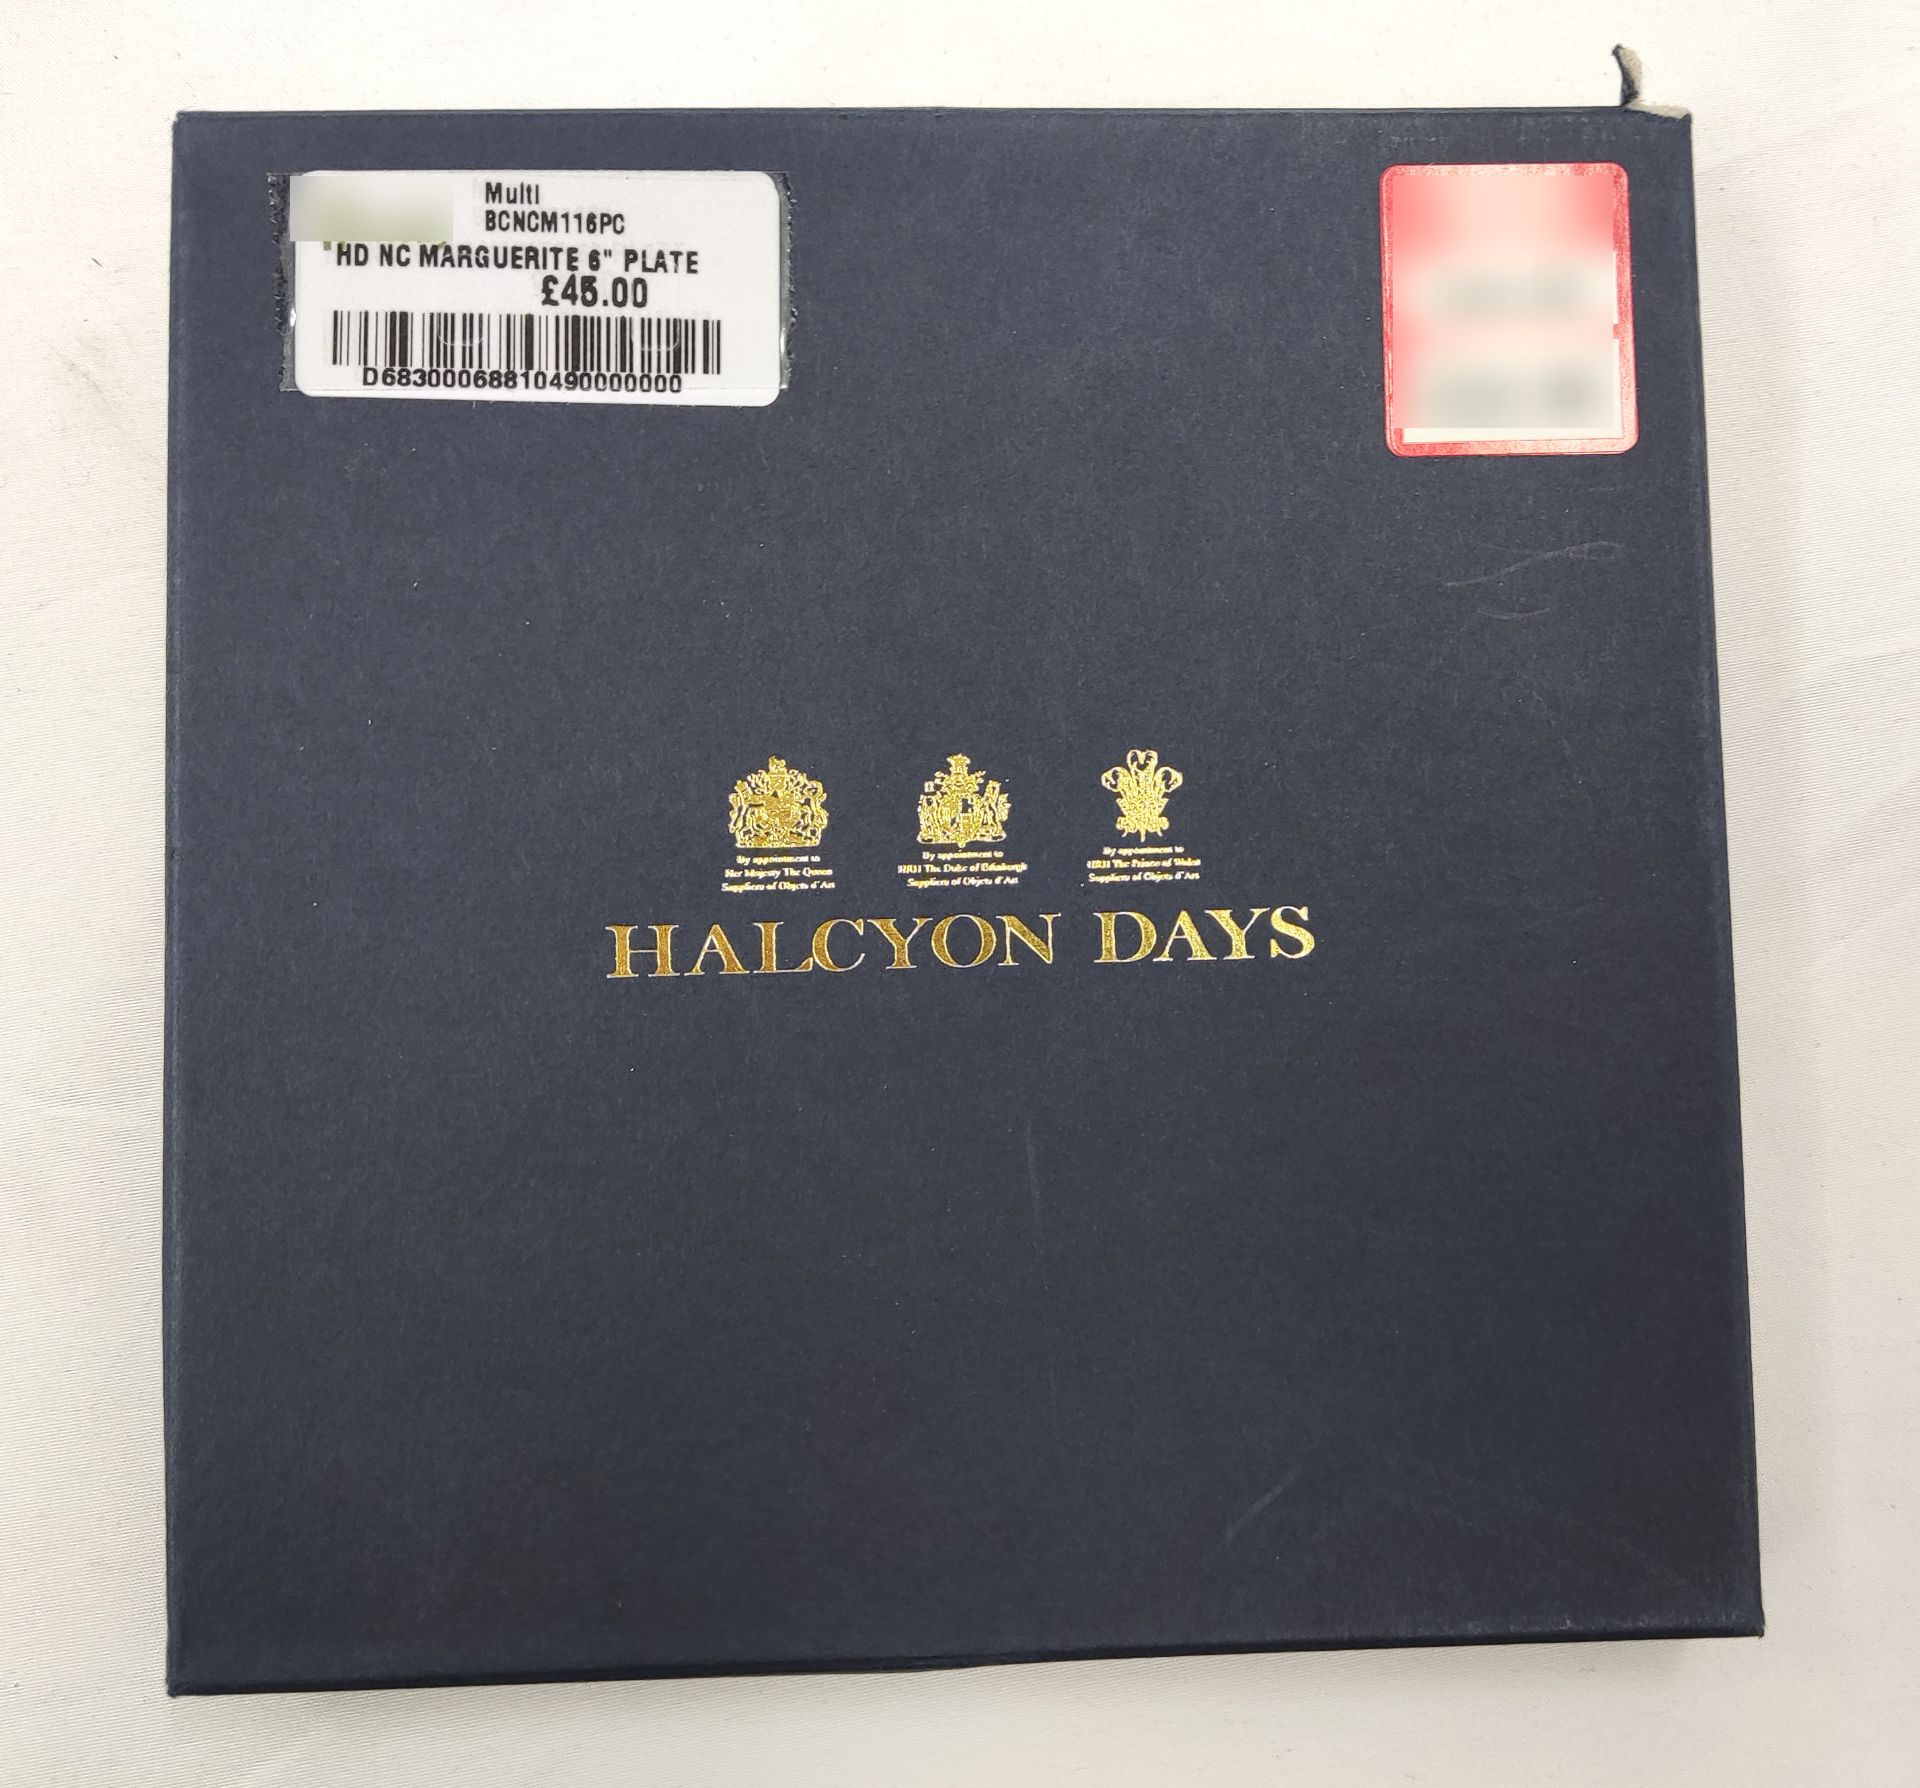 1 x HALCYON DAYS Nina Campbell Marguerite 6" Side Plate - New/Boxed - Original RRP £59.00 - Image 3 of 10